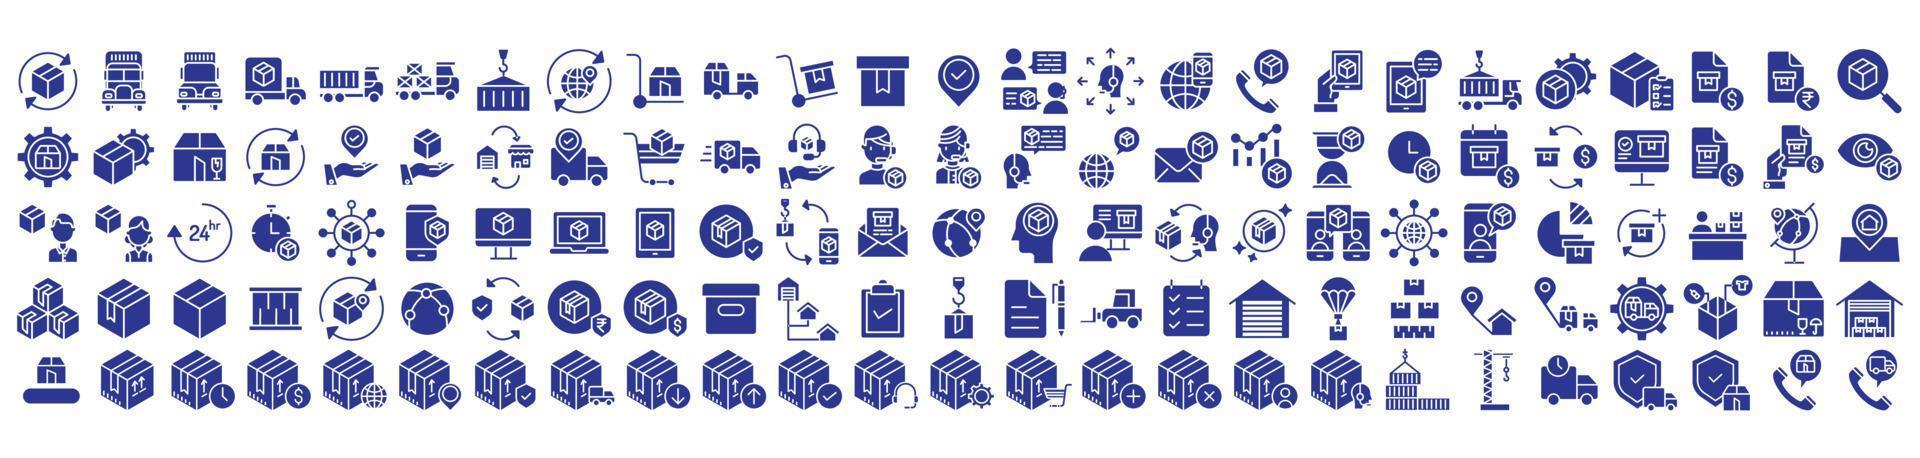 Collection of icons related to Logistics And Delivery, including icons like Package, Delivery Truck, shipping  and more. vector illustrations, Pixel Perfect